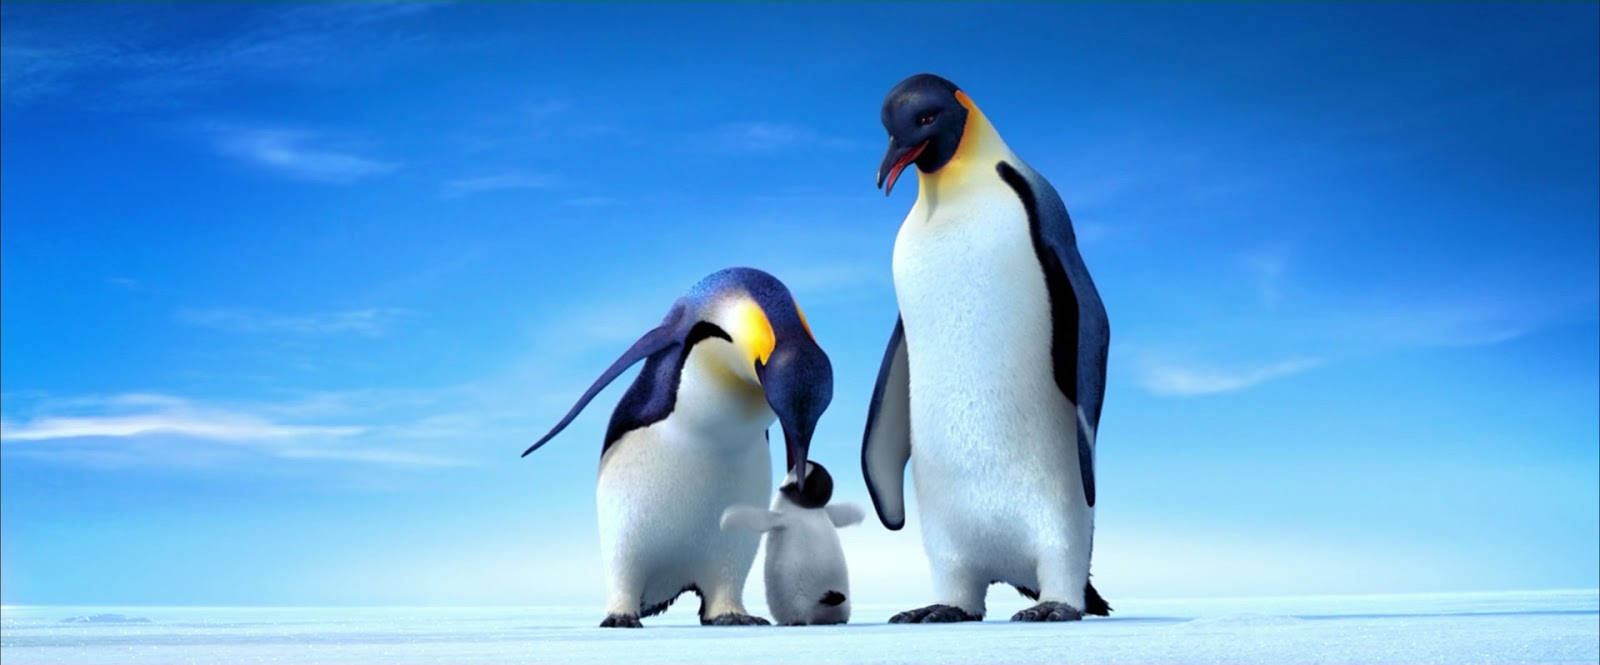 A Family Of Penguins Standing On The Snow Wallpaper